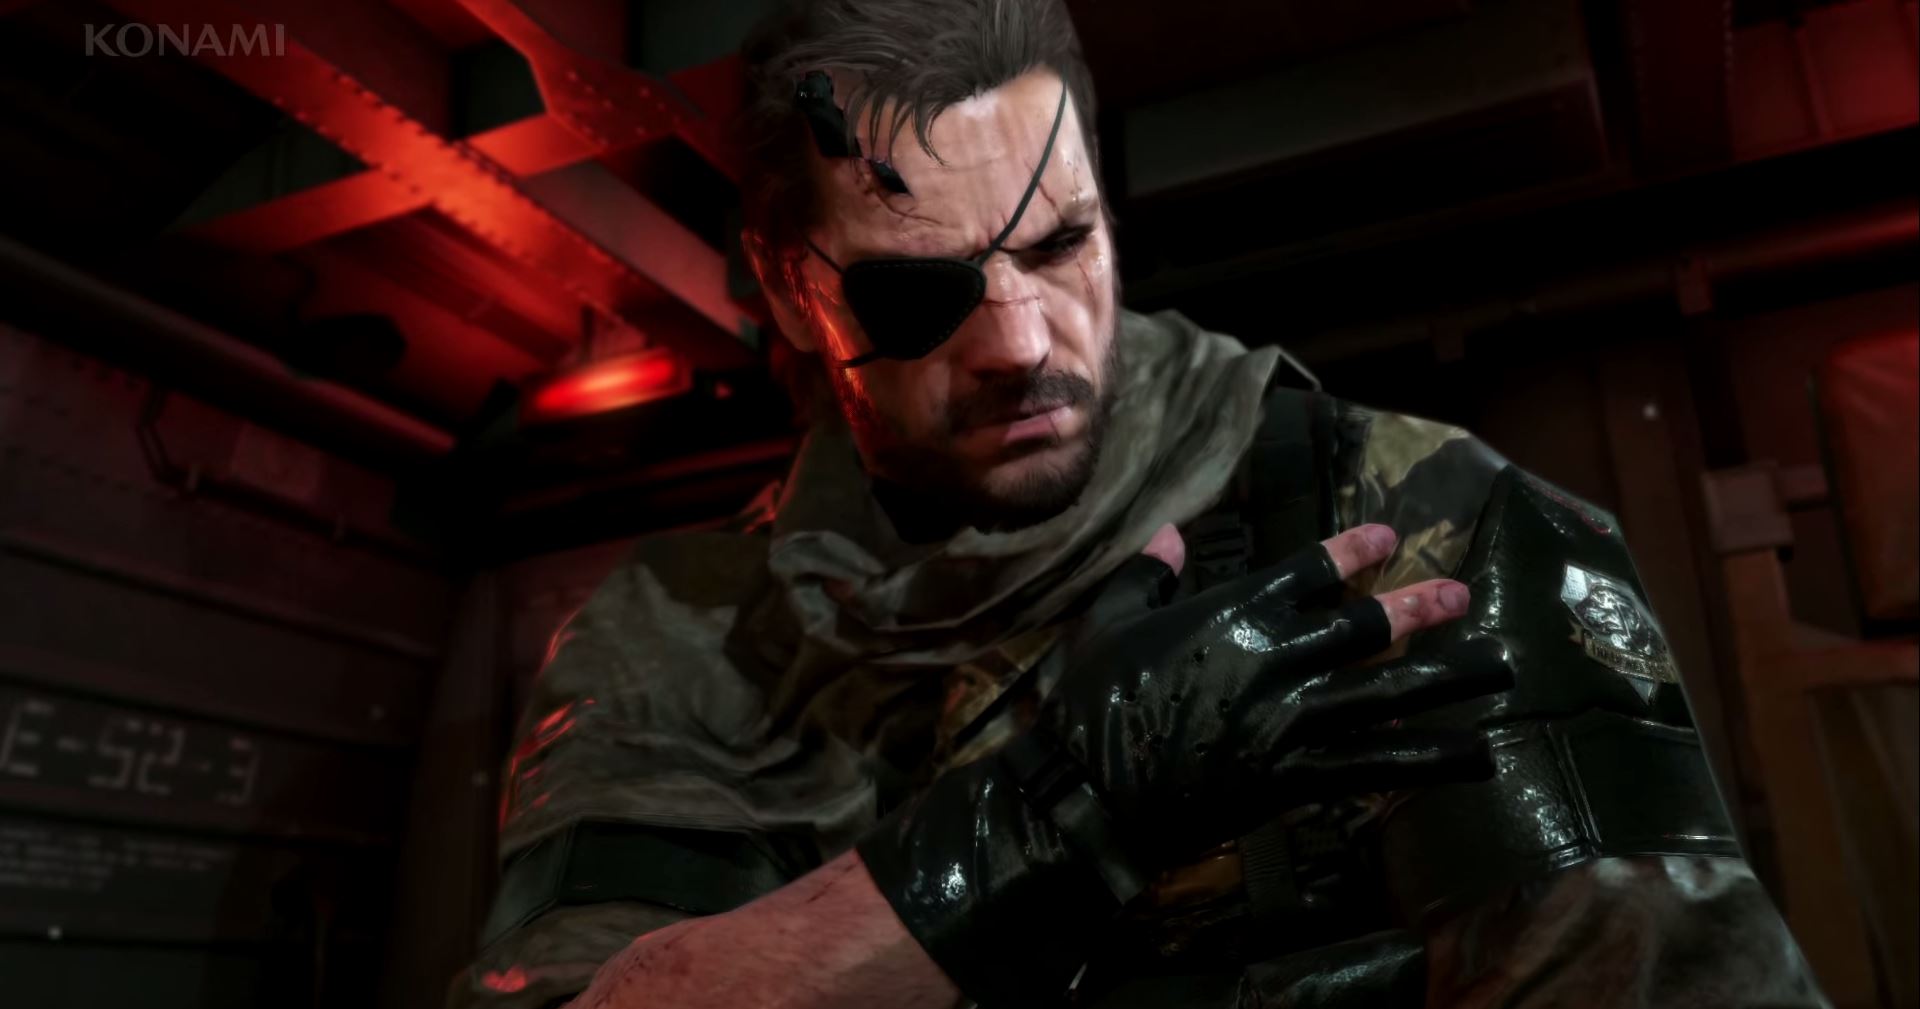 A Metal Gear Solid V Comparison Shows Differences Between TPP And GZ